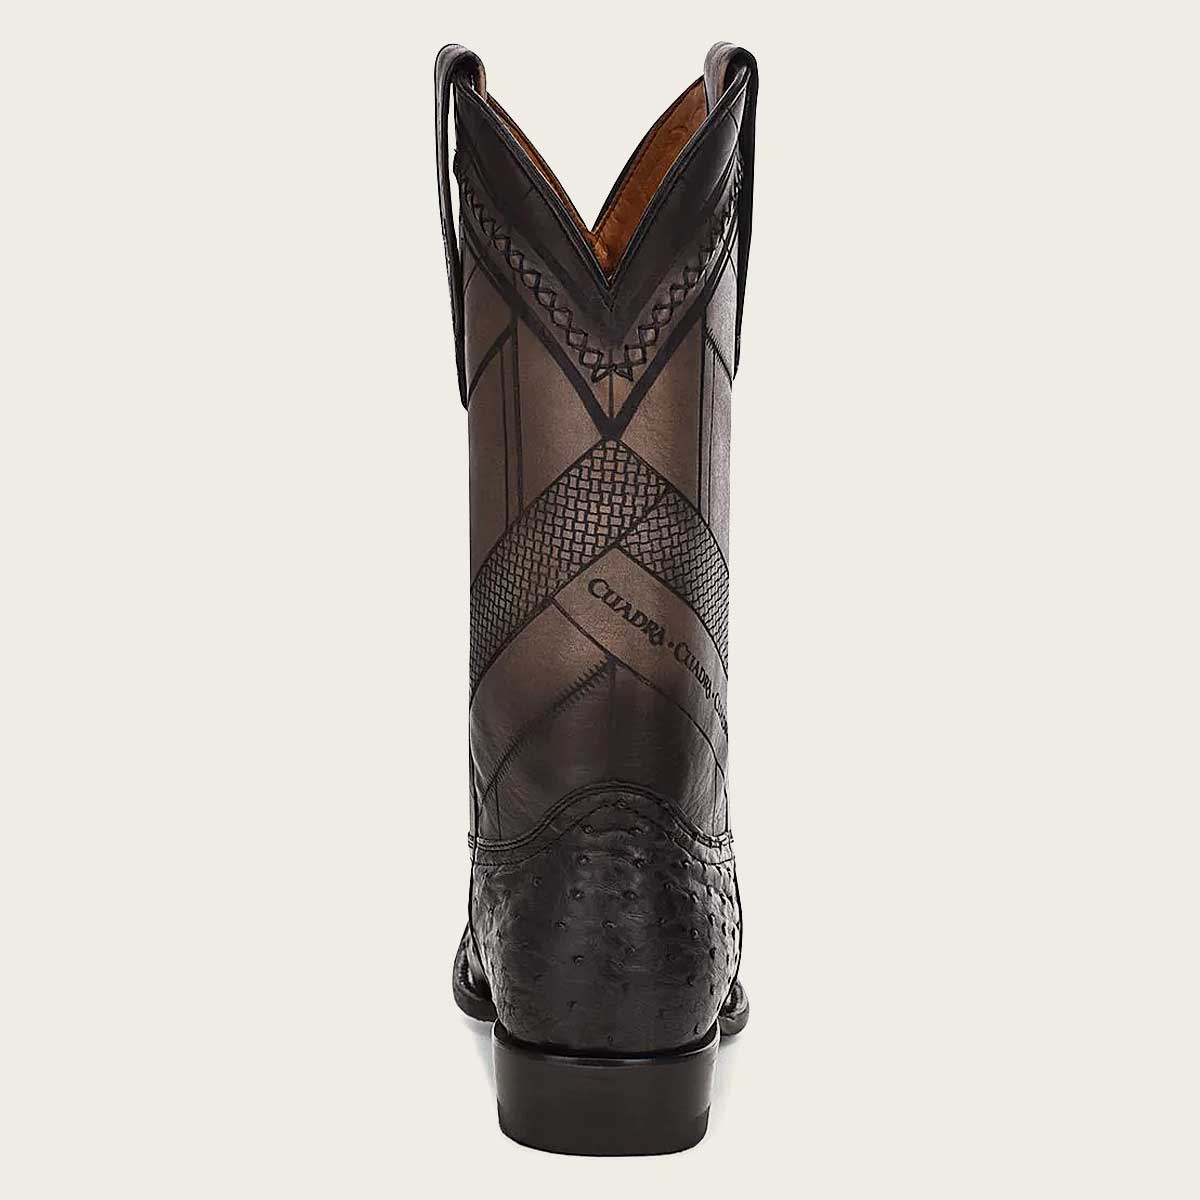 Engraved ostrich leather western boot